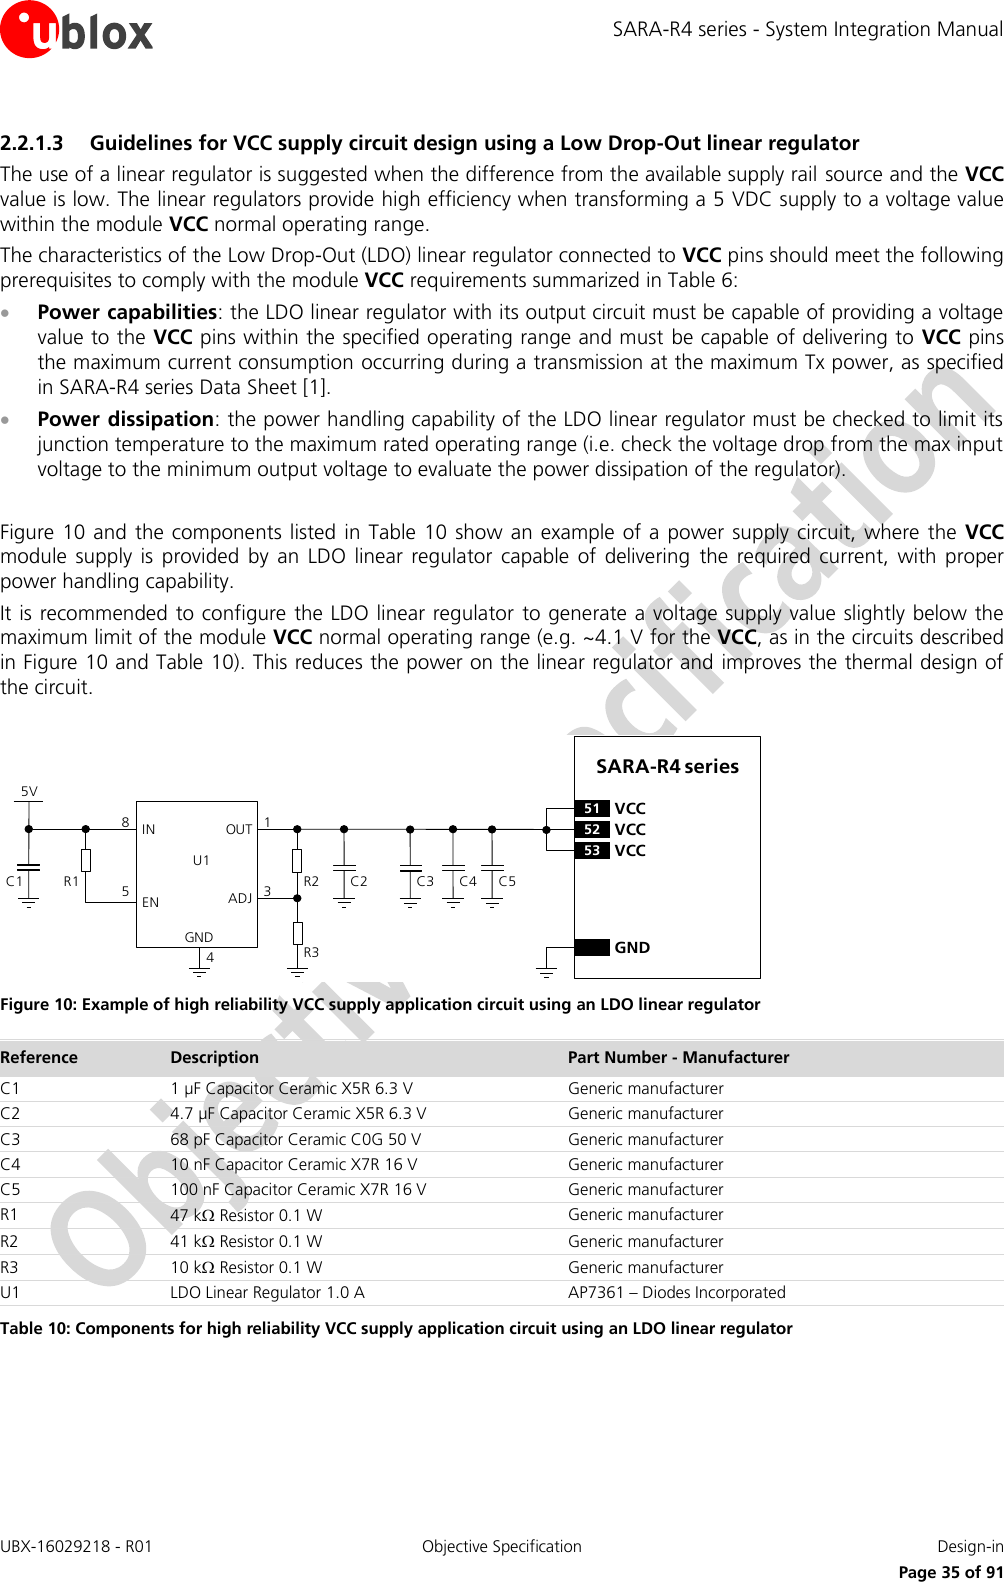 SARA-R4 series - System Integration Manual UBX-16029218 - R01  Objective Specification  Design-in     Page 35 of 91 2.2.1.3 Guidelines for VCC supply circuit design using a Low Drop-Out linear regulator The use of a linear regulator is suggested when the difference from the available supply rail source and the VCC value is low. The linear regulators provide high efficiency when transforming a 5 VDC supply to a voltage value within the module VCC normal operating range. The characteristics of the Low Drop-Out (LDO) linear regulator connected to VCC pins should meet the following prerequisites to comply with the module VCC requirements summarized in Table 6:  Power capabilities: the LDO linear regulator with its output circuit must be capable of providing a voltage value to the VCC pins within the specified operating range and must be capable of delivering to VCC pins the maximum current consumption occurring during a transmission at the maximum Tx power, as specified in SARA-R4 series Data Sheet [1].  Power dissipation: the power handling capability of the LDO linear regulator must be checked to limit its junction temperature to the maximum rated operating range (i.e. check the voltage drop from the max input voltage to the minimum output voltage to evaluate the power dissipation of the regulator).  Figure 10 and  the  components listed  in Table 10  show  an example of a power  supply circuit,  where  the  VCC module  supply  is  provided  by  an LDO  linear  regulator  capable  of  delivering  the  required  current,  with proper power handling capability. It is recommended to configure the LDO linear regulator  to generate a voltage supply value slightly below the maximum limit of the module VCC normal operating range (e.g. ~4.1 V for the VCC, as in the circuits described in Figure 10 and Table 10). This reduces the power on the linear regulator and improves the thermal design of the circuit.  5VC1 R1IN OUTADJGND58134C2R2R3U1ENSARA-R4 series52 VCC53 VCC51 VCCGNDC4C3 C5 Figure 10: Example of high reliability VCC supply application circuit using an LDO linear regulator Reference Description Part Number - Manufacturer C1 1 µF Capacitor Ceramic X5R 6.3 V Generic manufacturer C2 4.7 µF Capacitor Ceramic X5R 6.3 V Generic manufacturer C3 68 pF Capacitor Ceramic C0G 50 V Generic manufacturer C4 10 nF Capacitor Ceramic X7R 16 V Generic manufacturer C5 100 nF Capacitor Ceramic X7R 16 V Generic manufacturer R1 47 k Resistor 0.1 W Generic manufacturer R2 41 k Resistor 0.1 W Generic manufacturer R3 10 k Resistor 0.1 W Generic manufacturer U1 LDO Linear Regulator 1.0 A AP7361 – Diodes Incorporated Table 10: Components for high reliability VCC supply application circuit using an LDO linear regulator  